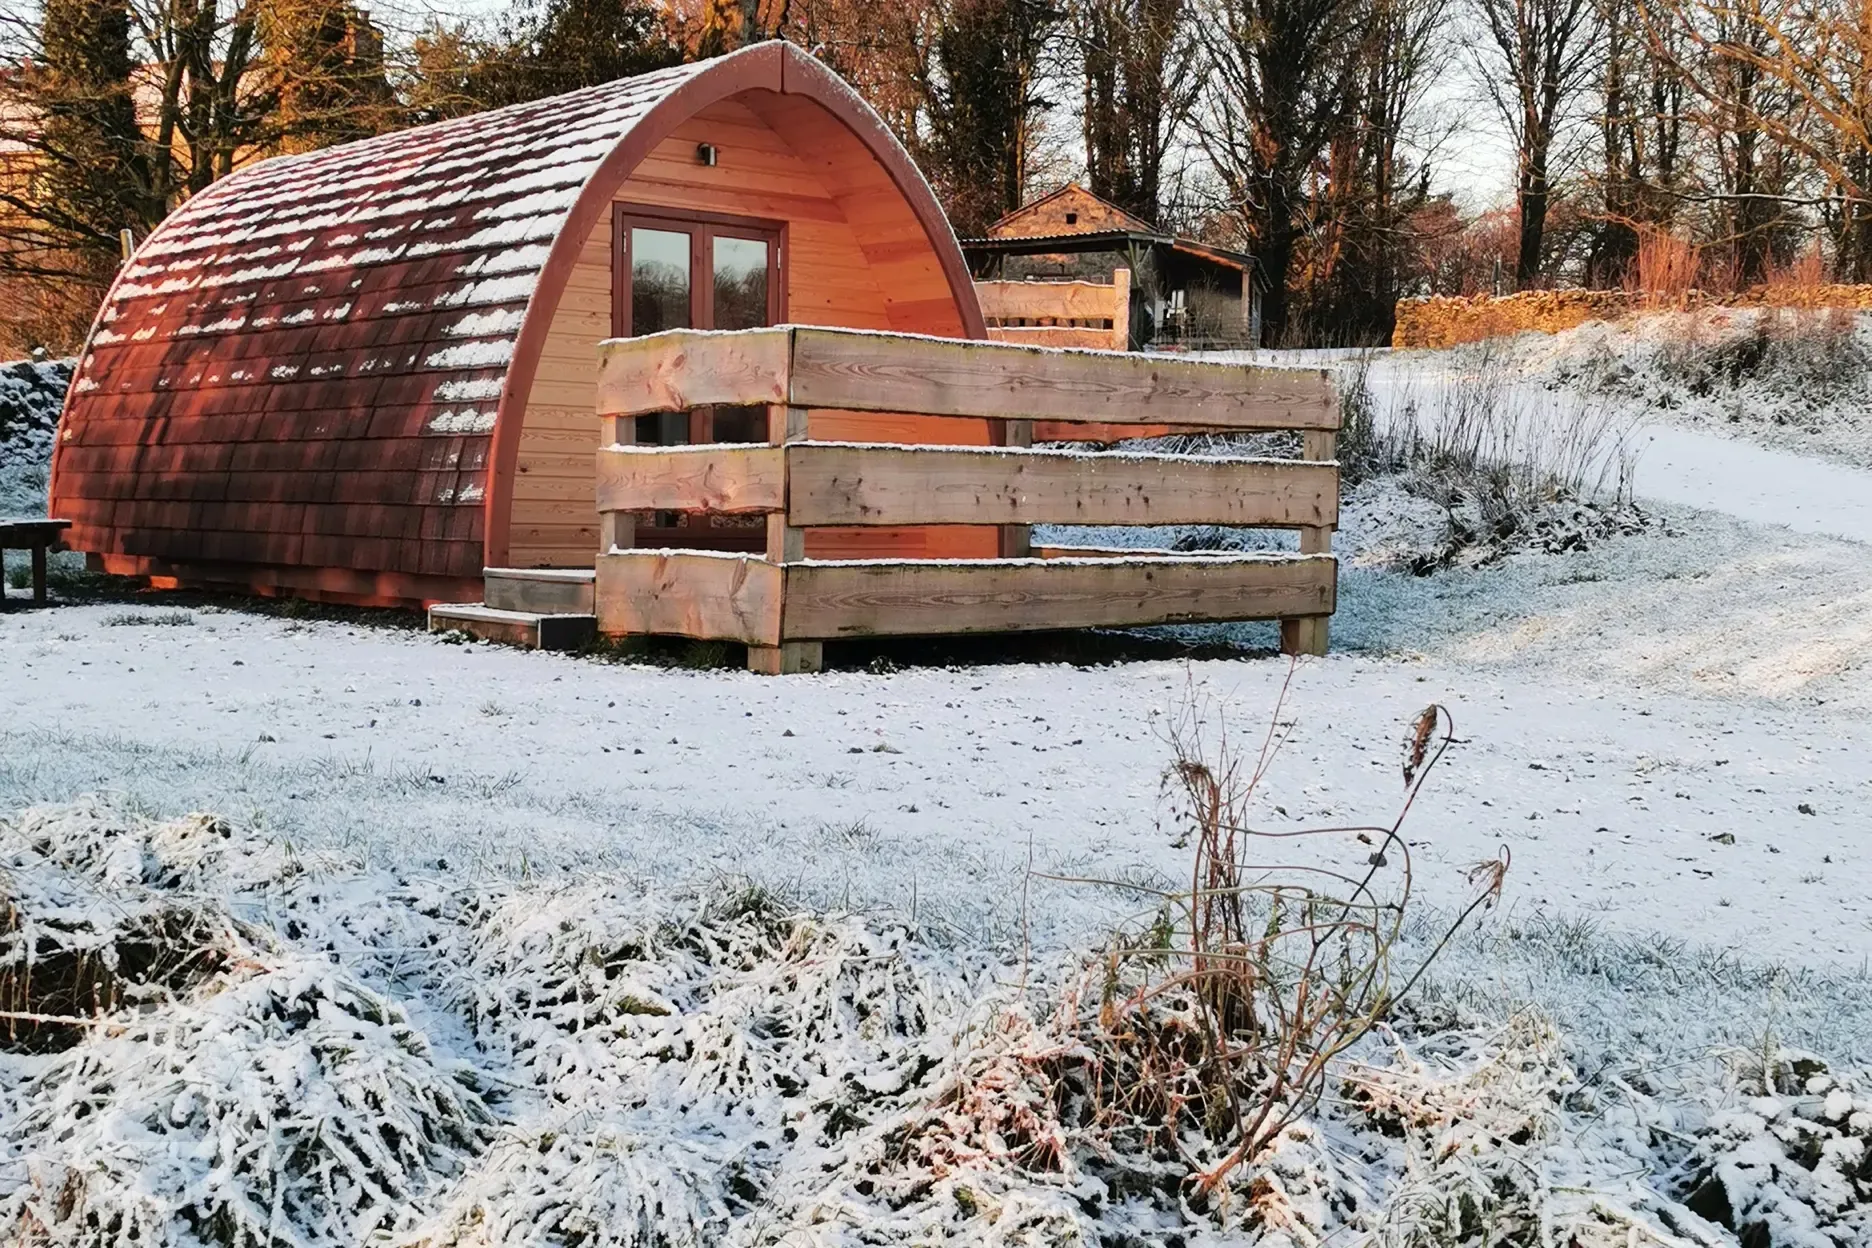 Camping pod in winter